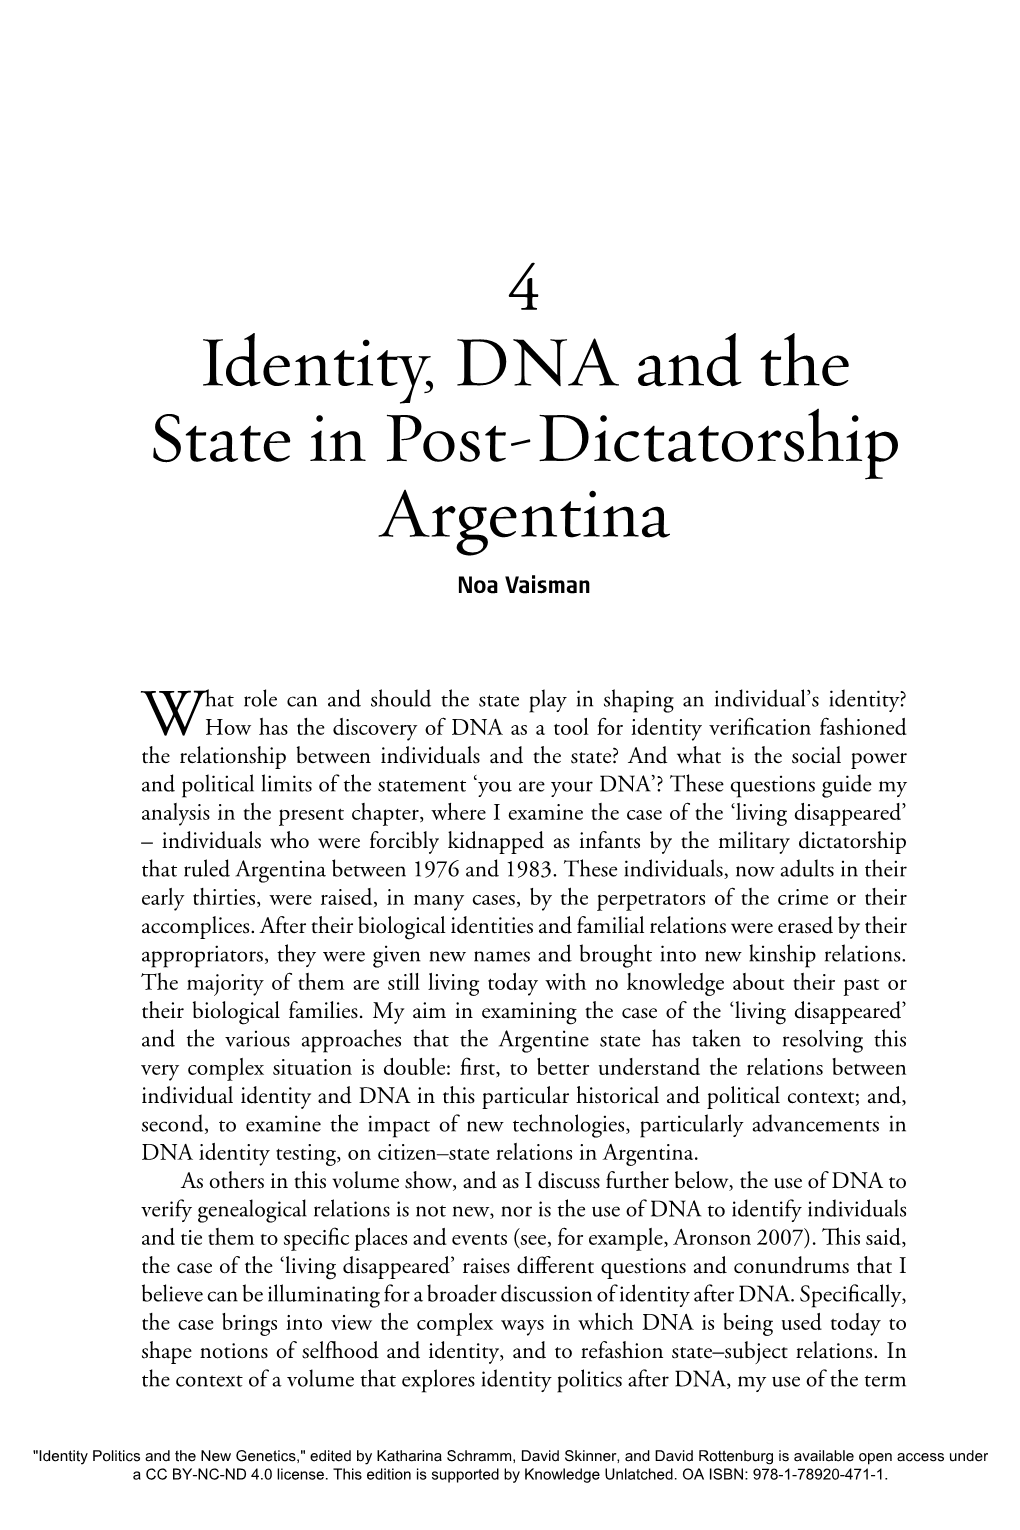 Identity, DNA and the State in Post-Dictatorship Argentina Noa Vaisman